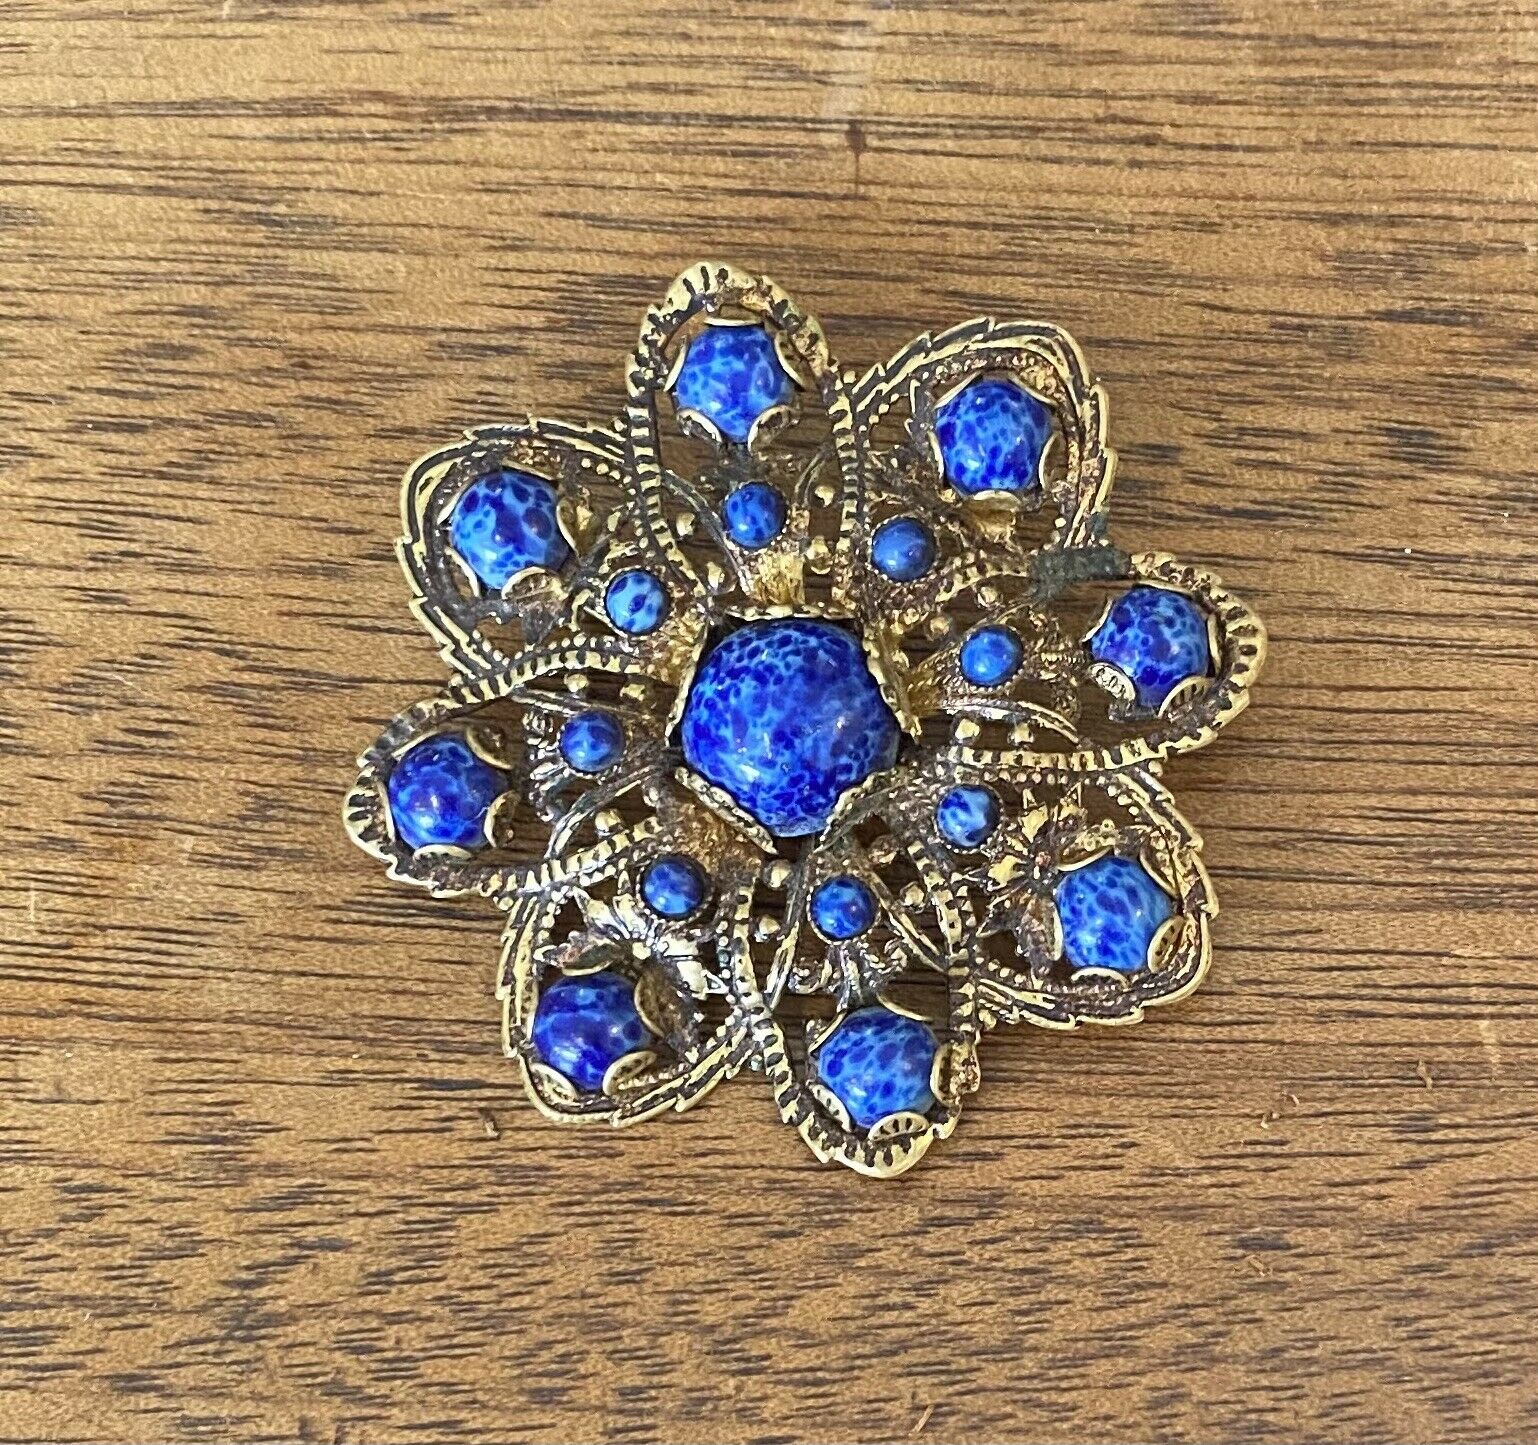 Featured image for “Broche ancienne”